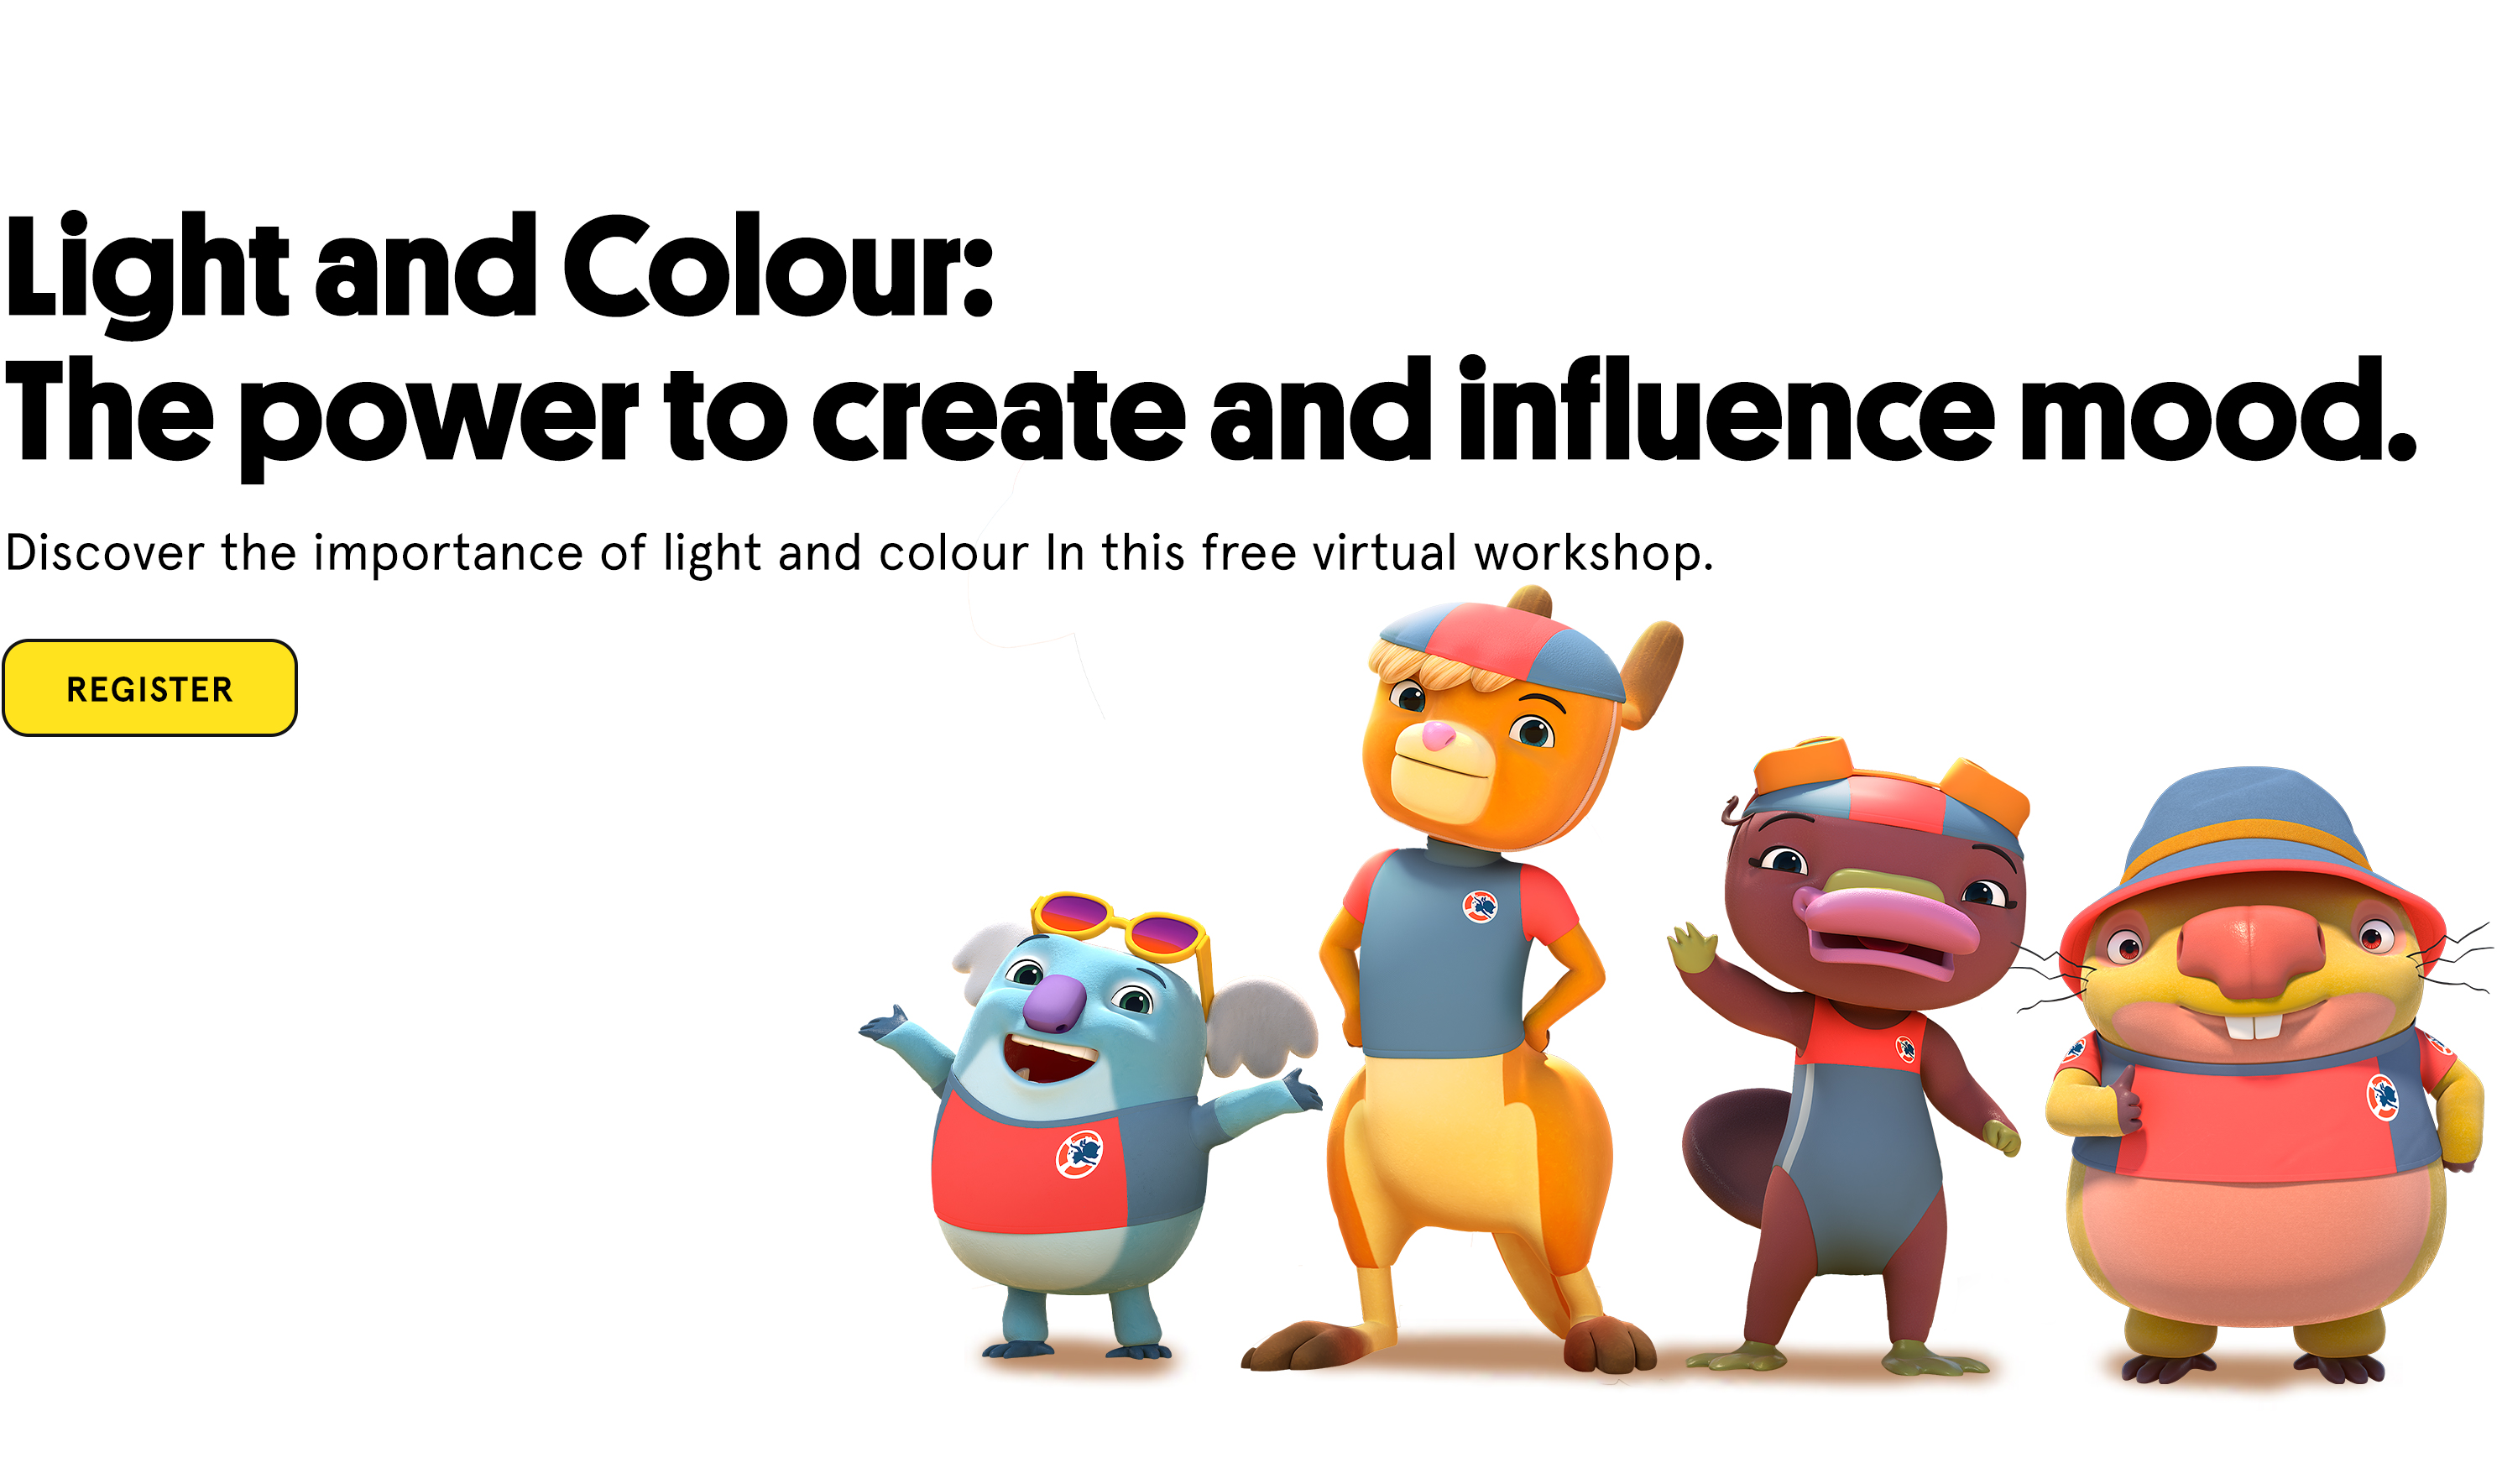 Light and Colour: The power to create and influence mood